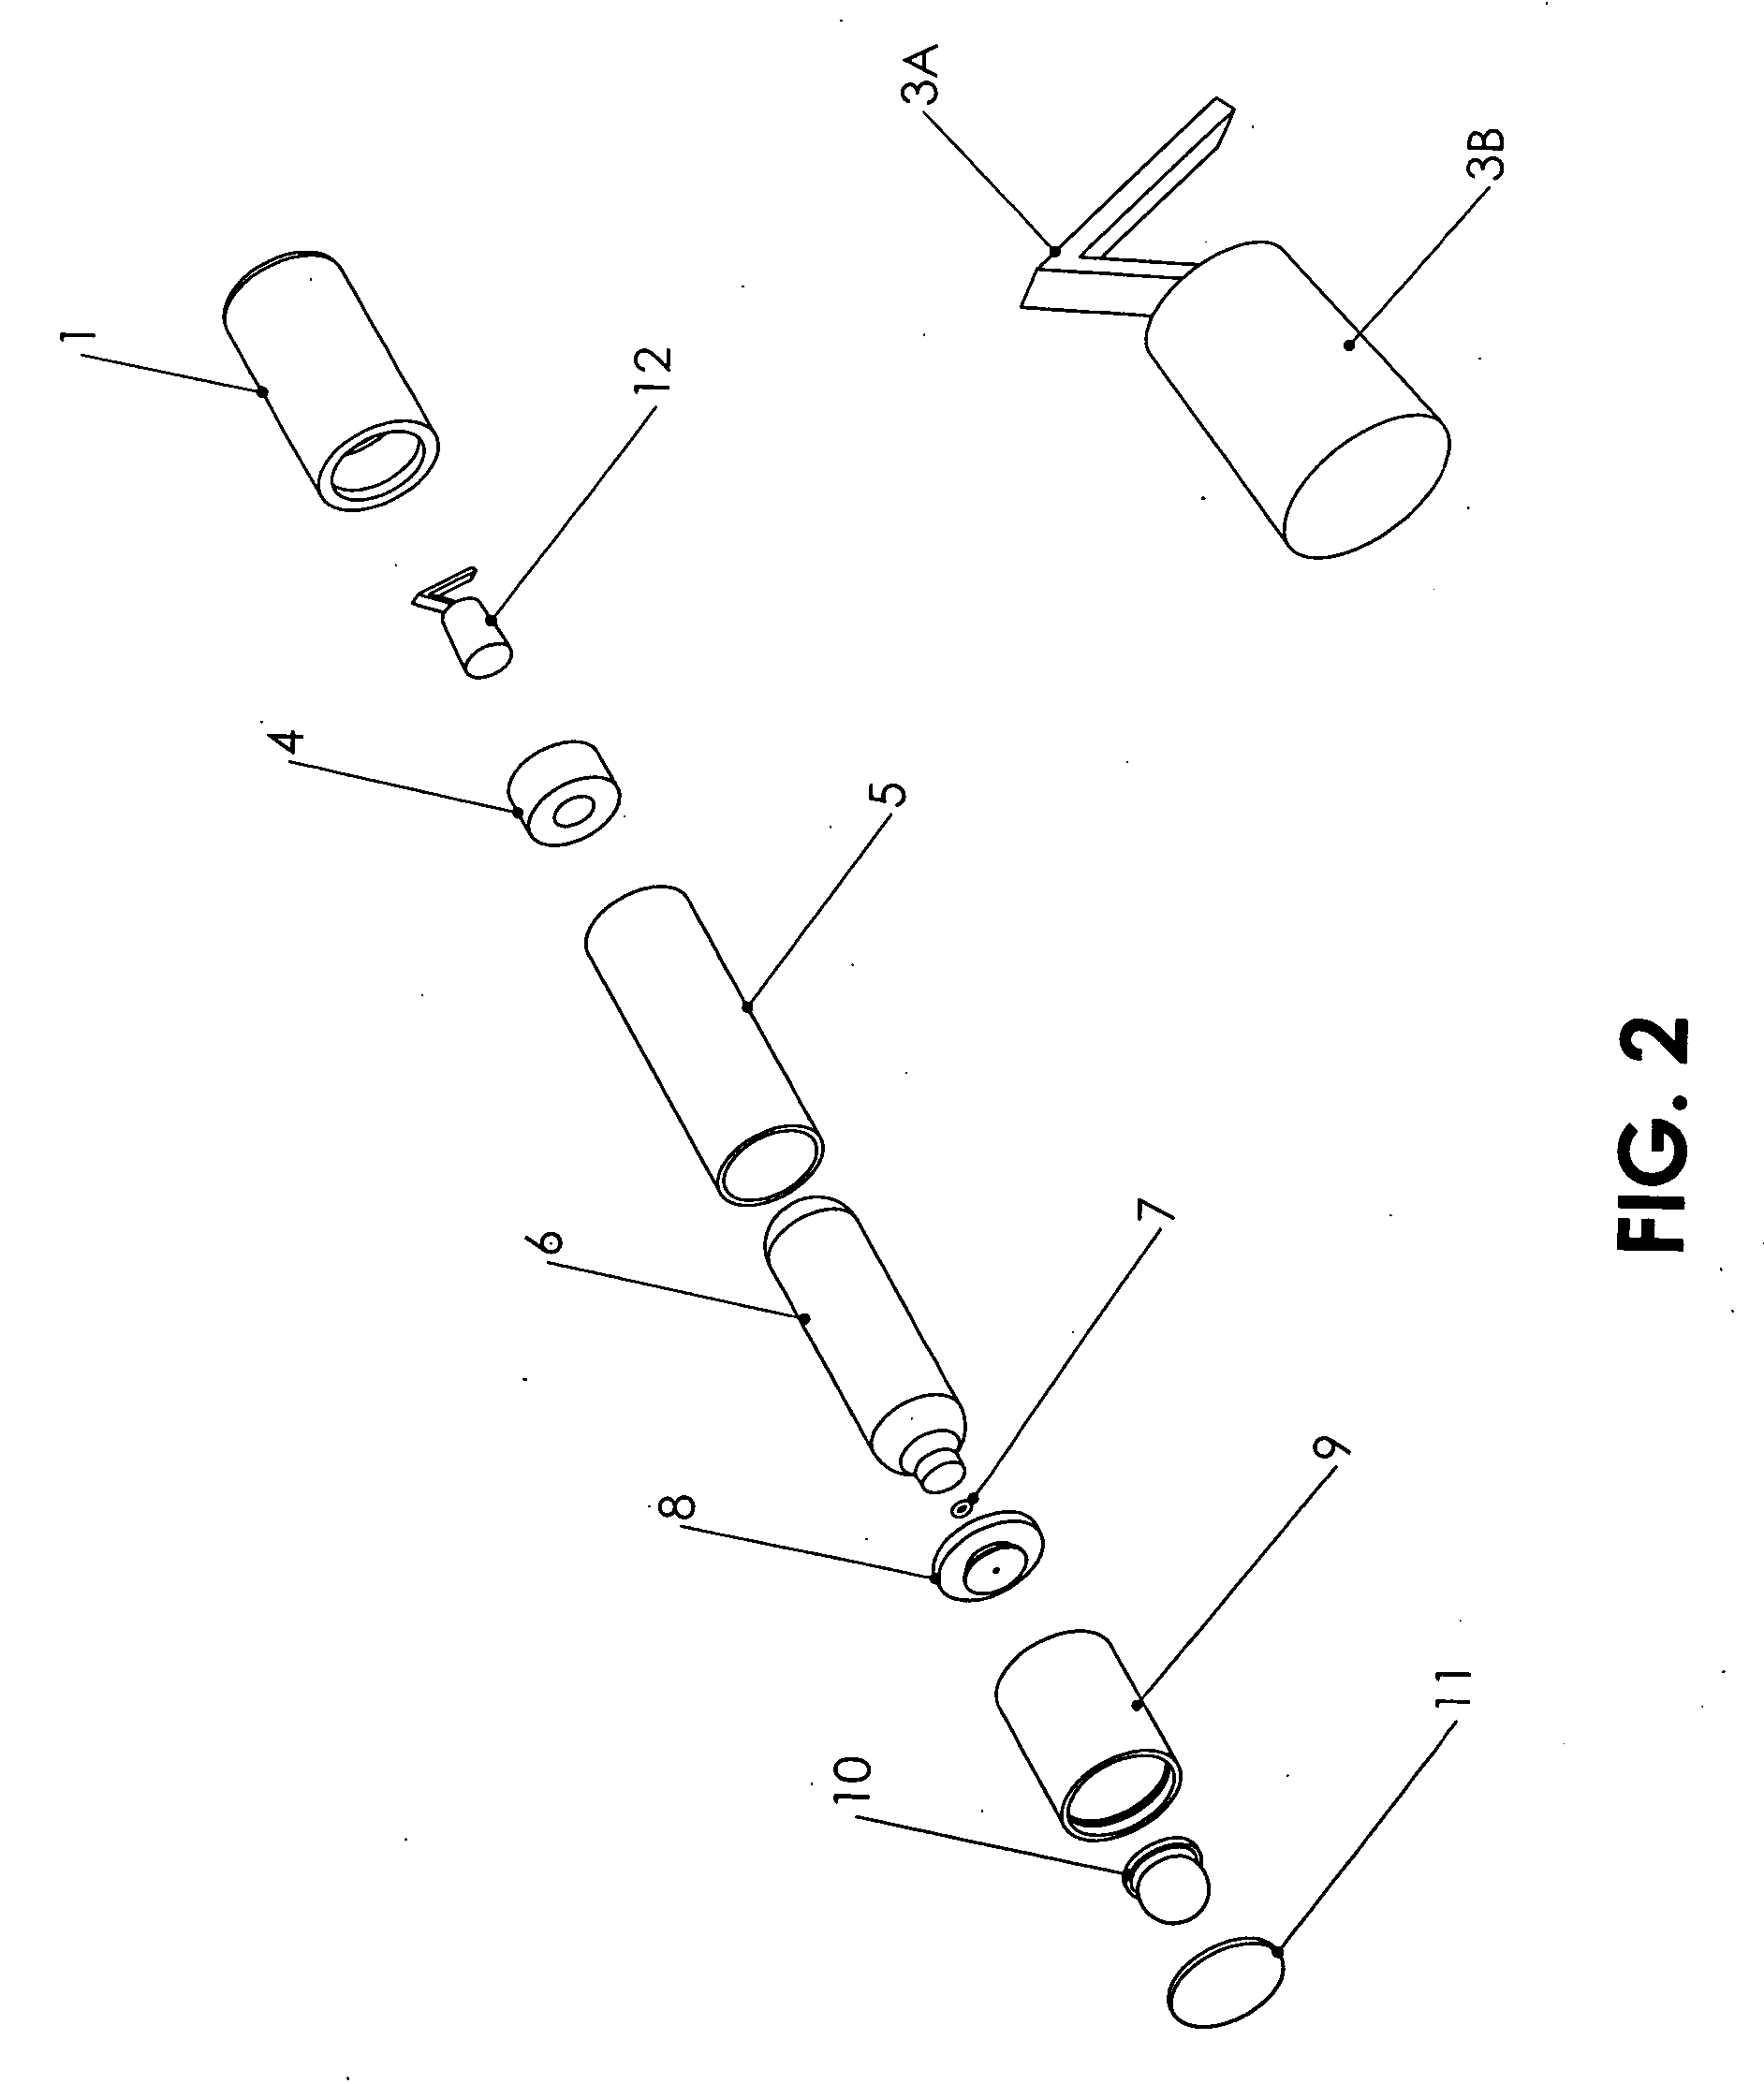 Inflatable buoyancy device with water-dependant triggering mechanism